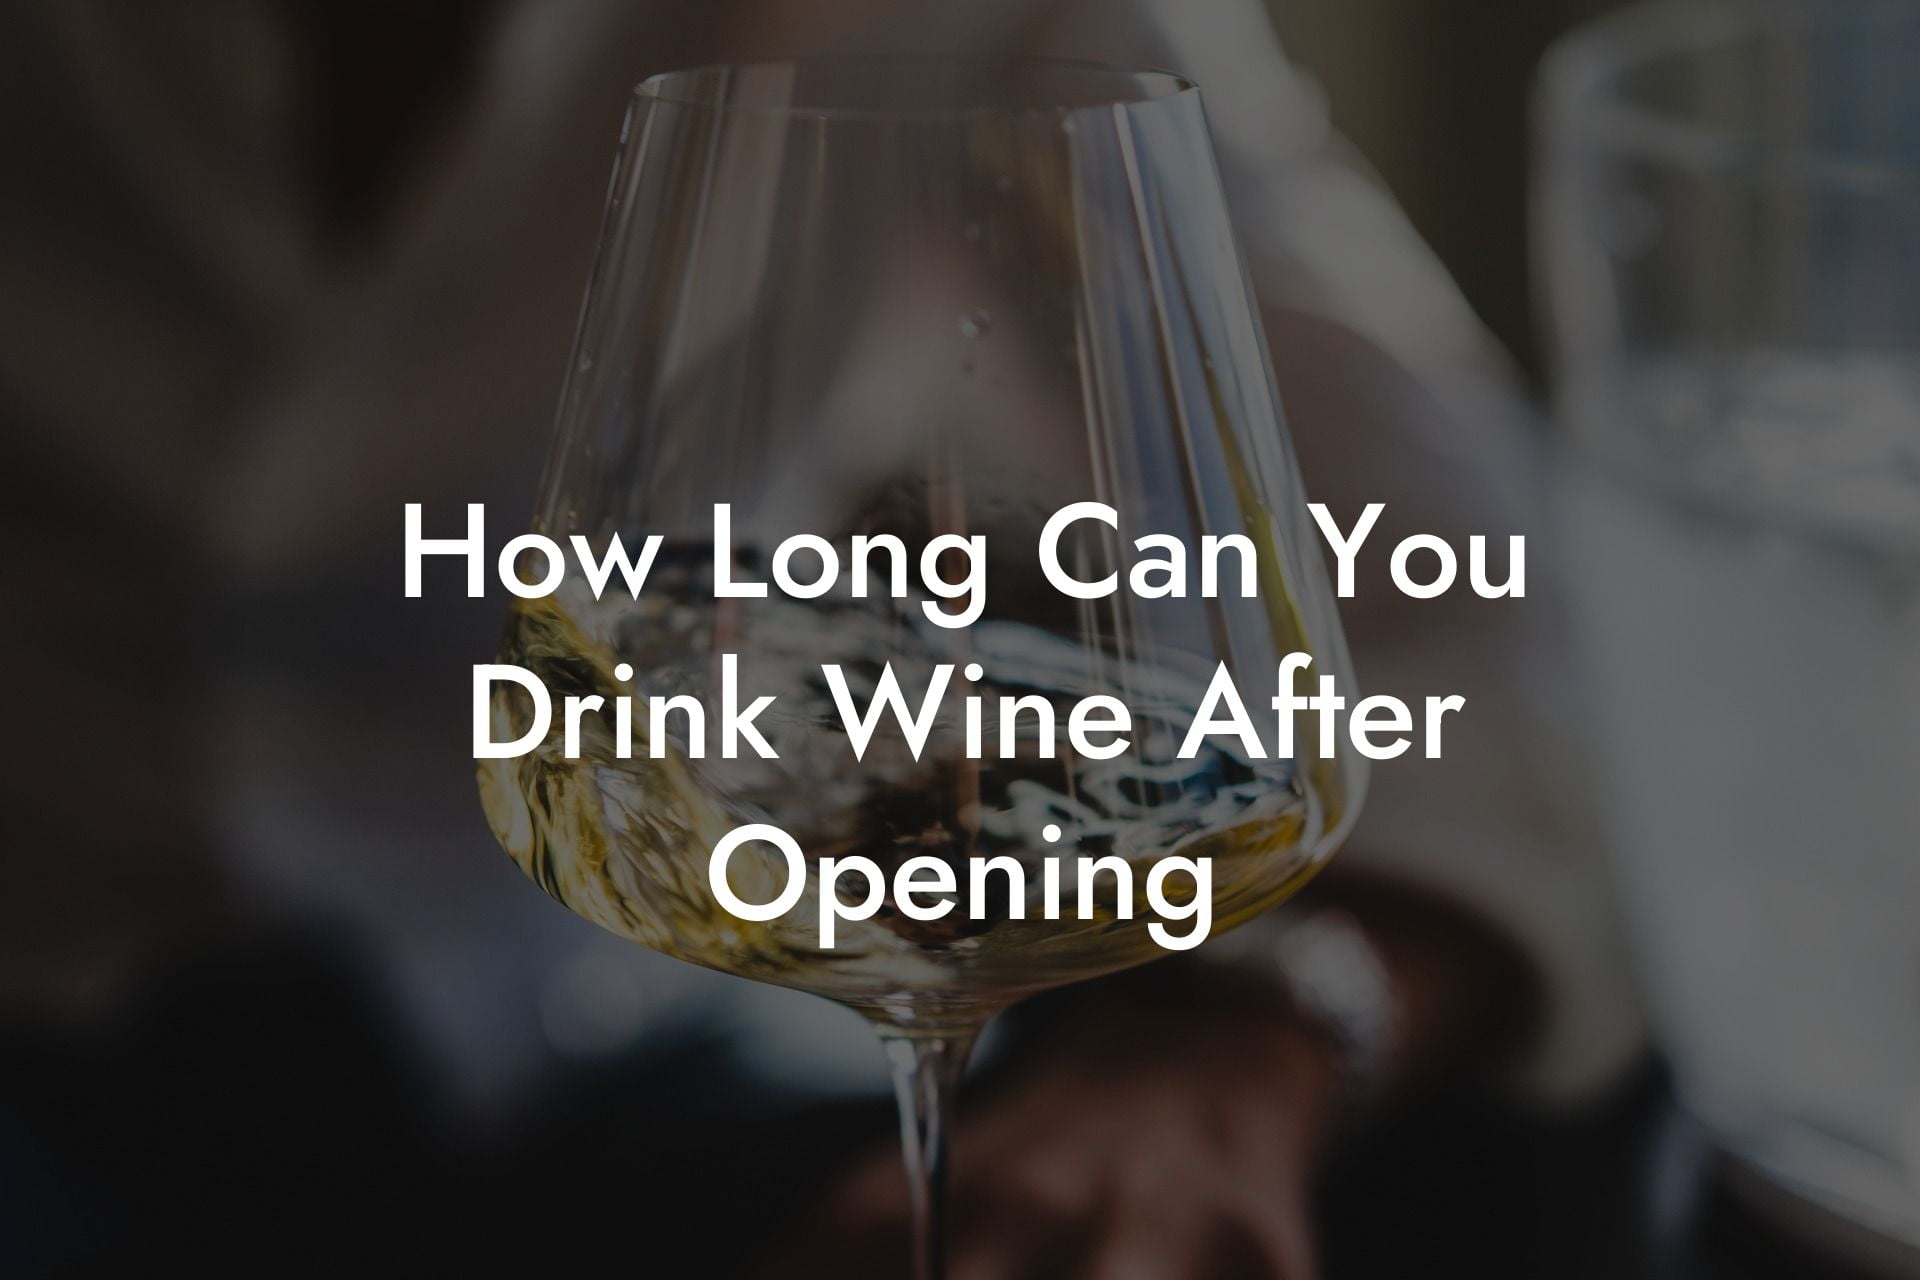 How Long Can You Drink Wine After Opening